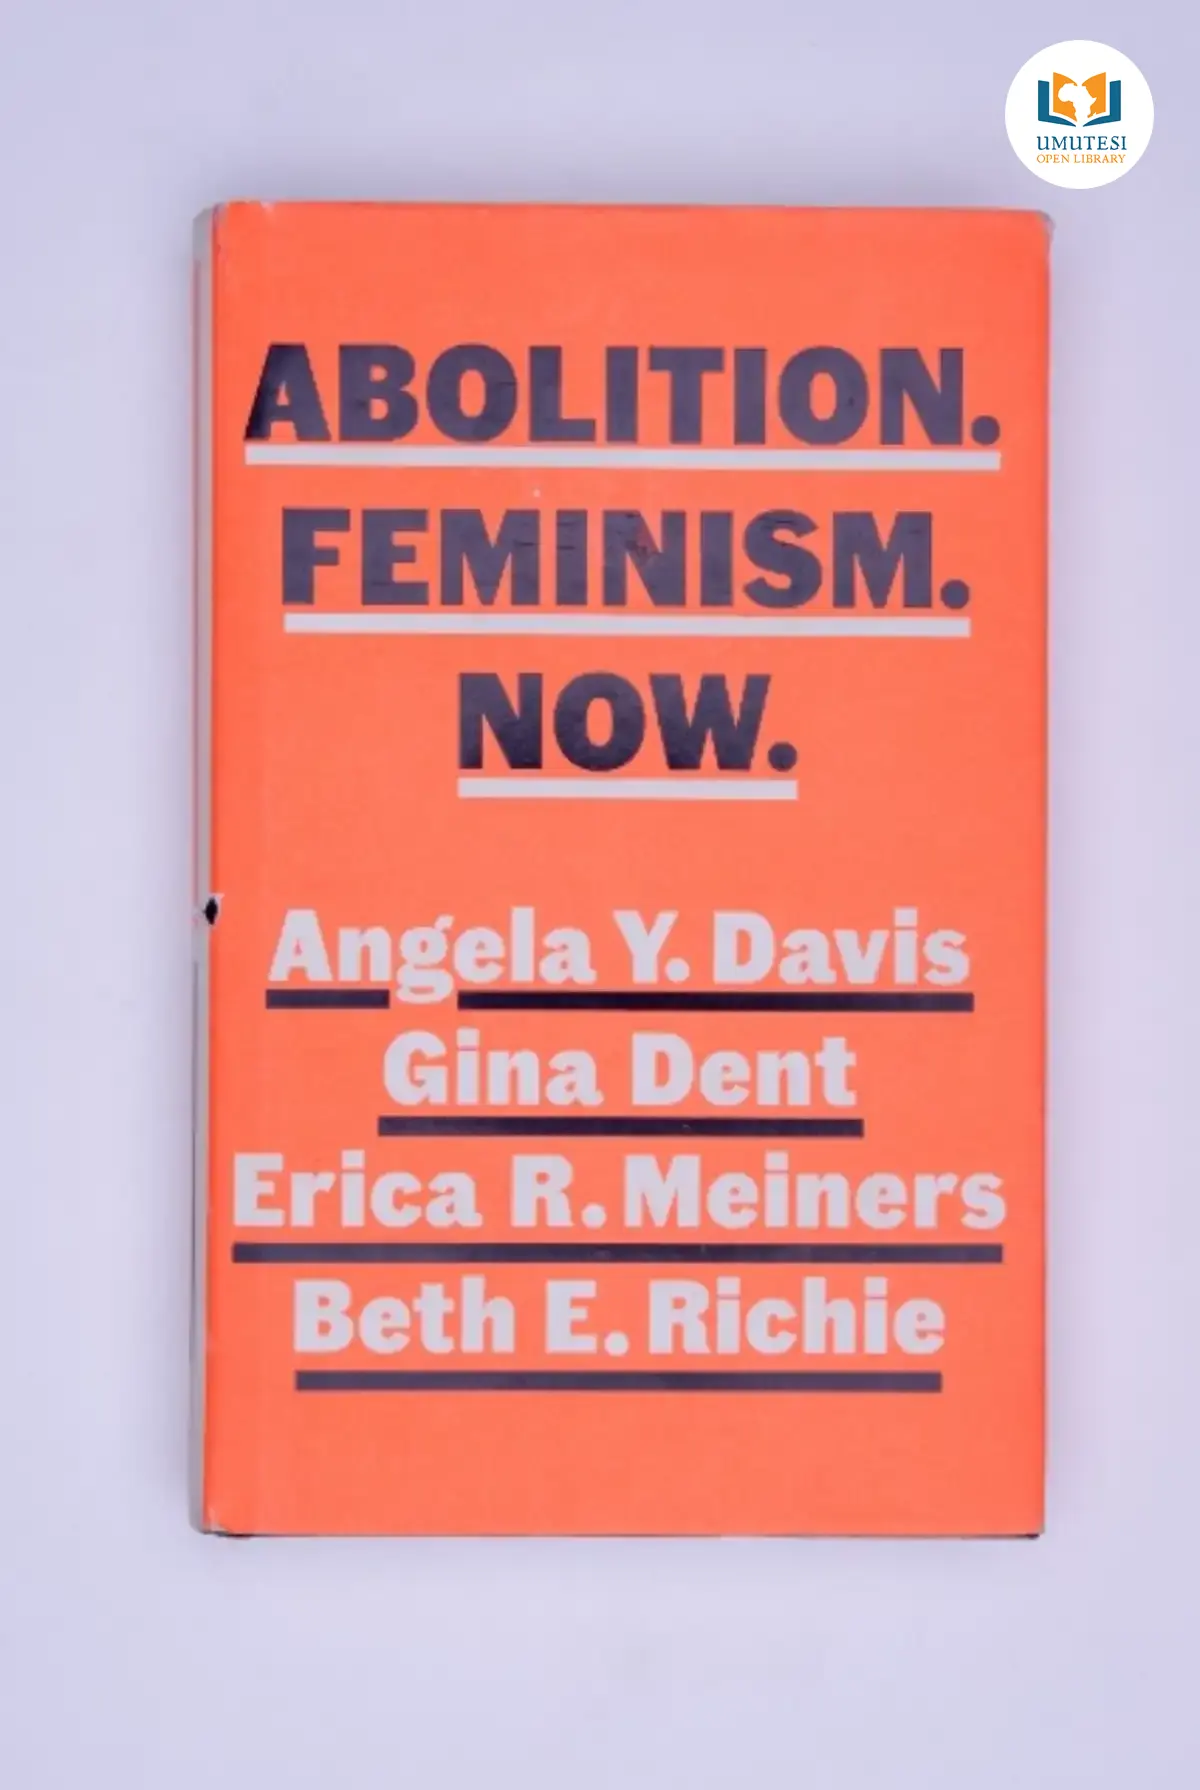 Abolition. Feminism. Now | Angela Y. Davis and Others